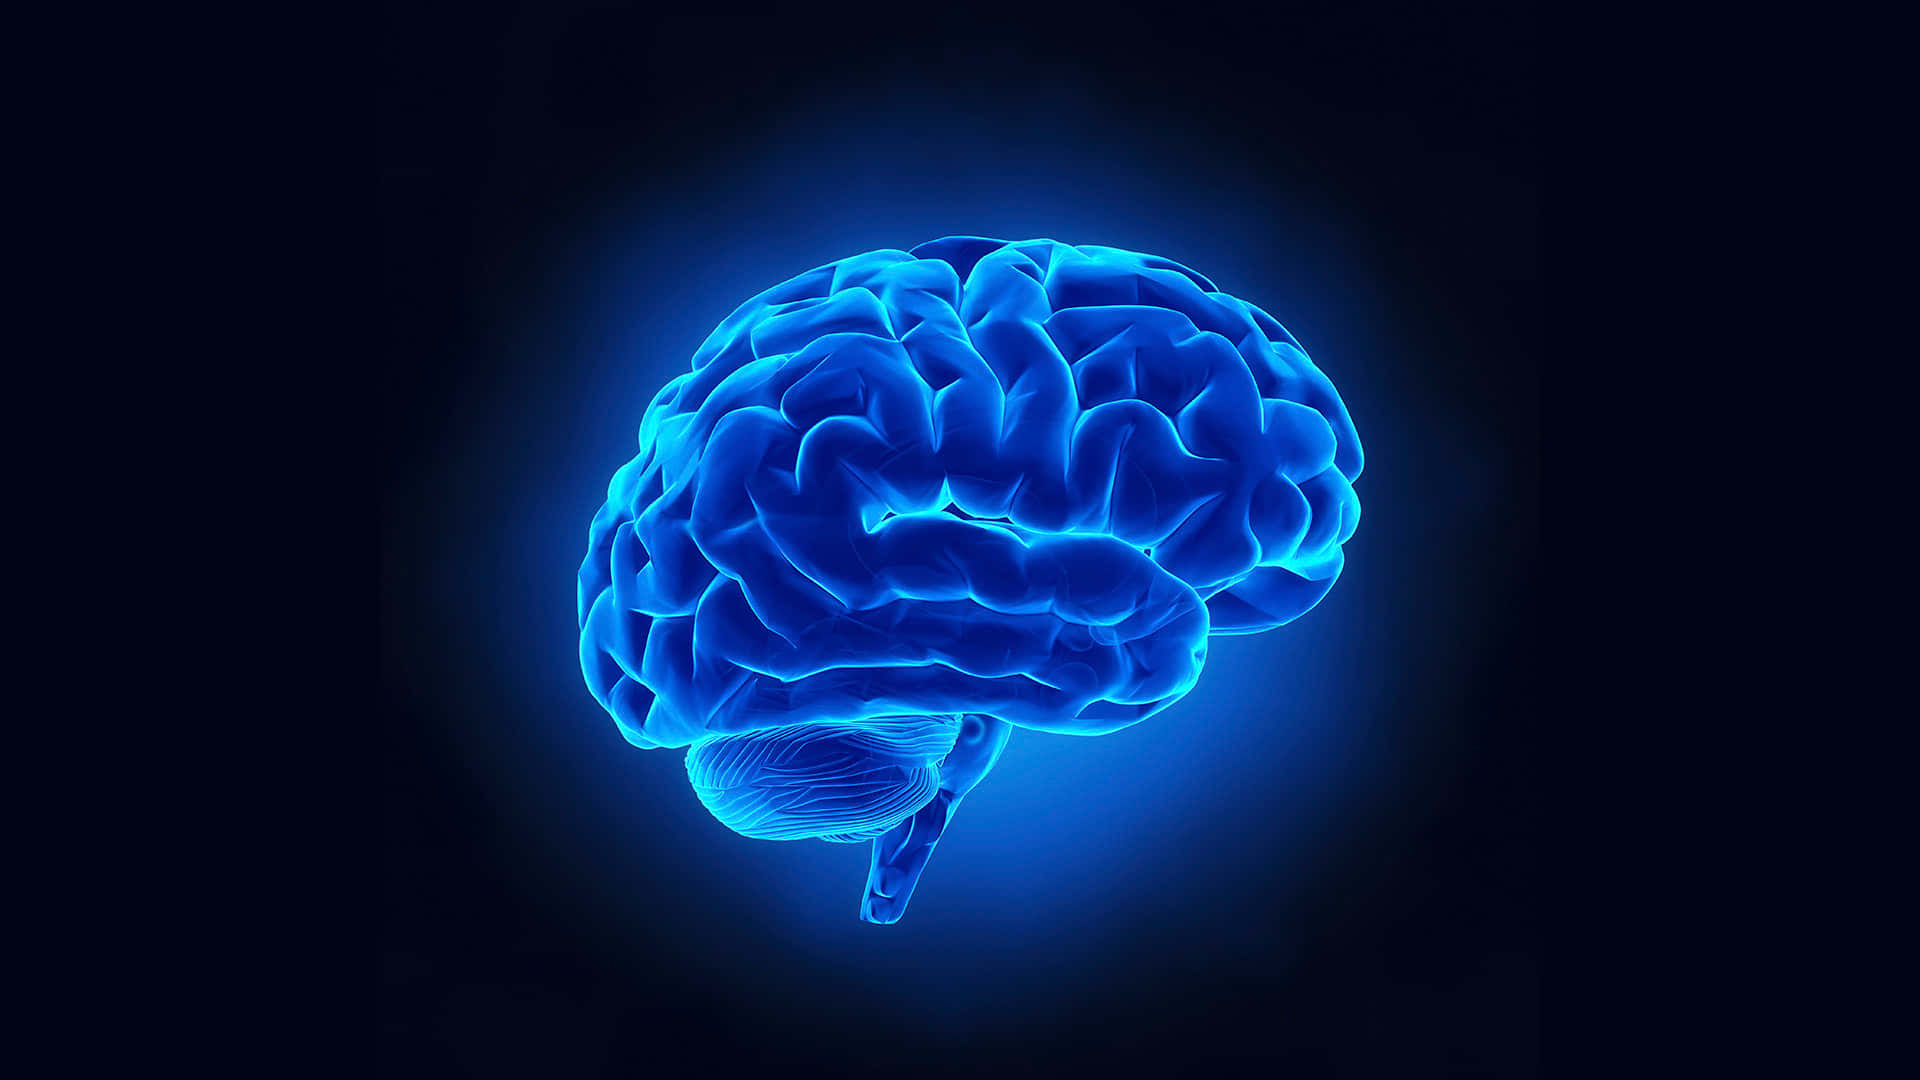 A Blue Brain Is Shown On A Black Background